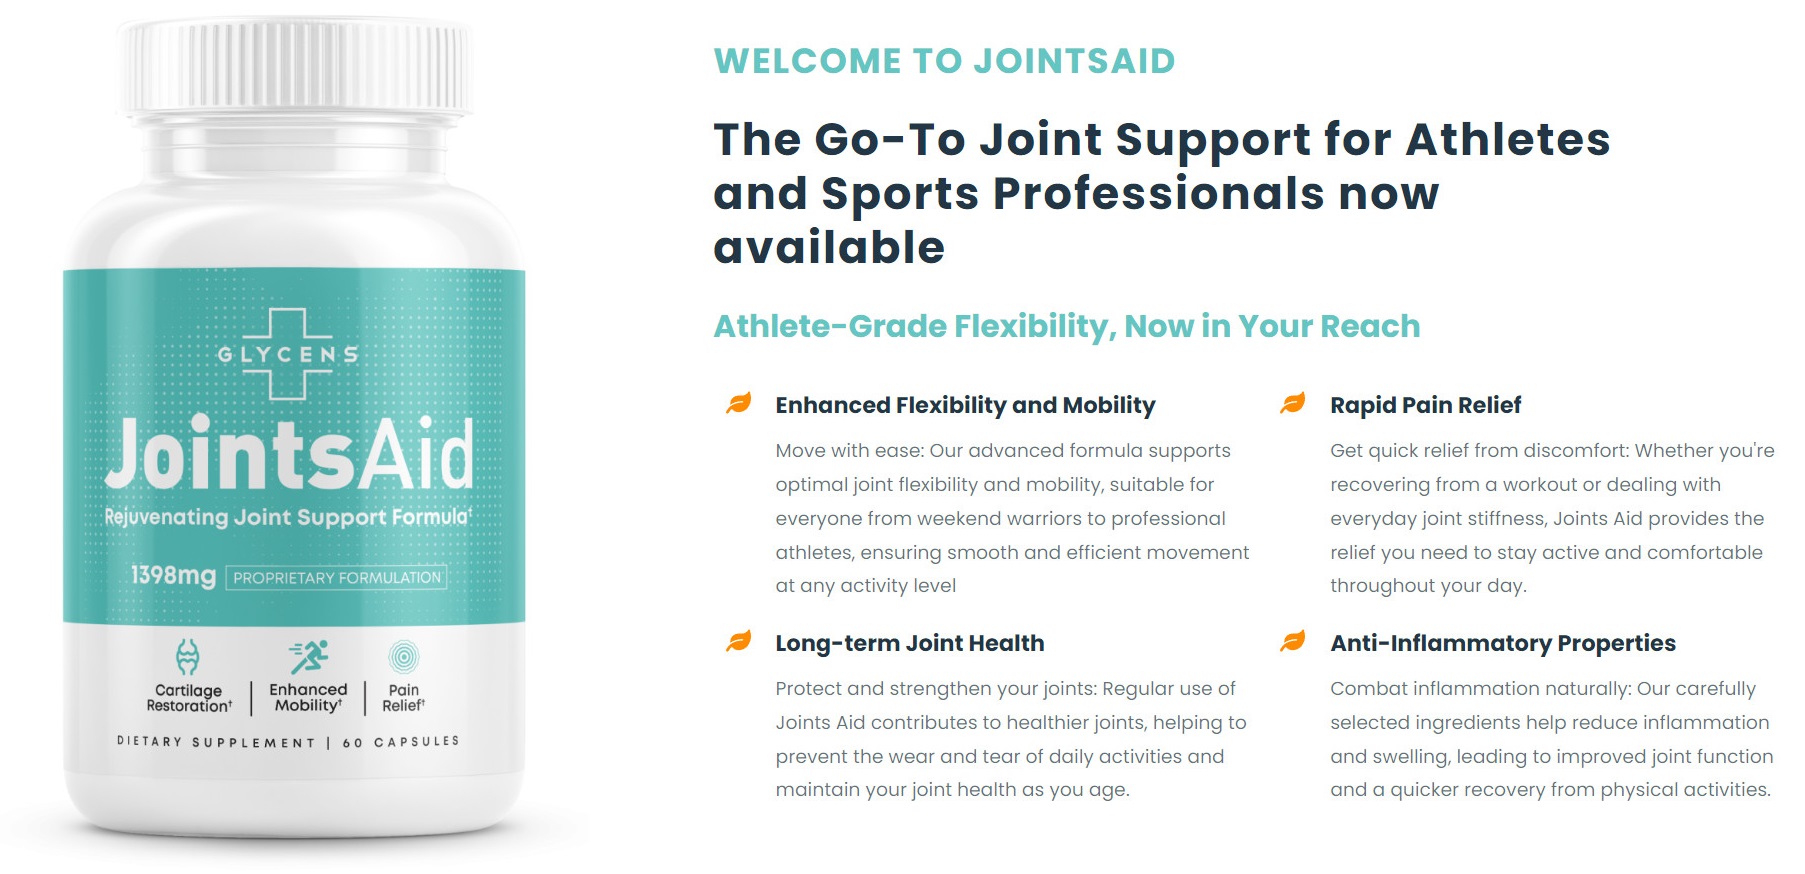 Glycens JointsAid Joint Support Formula Reviews